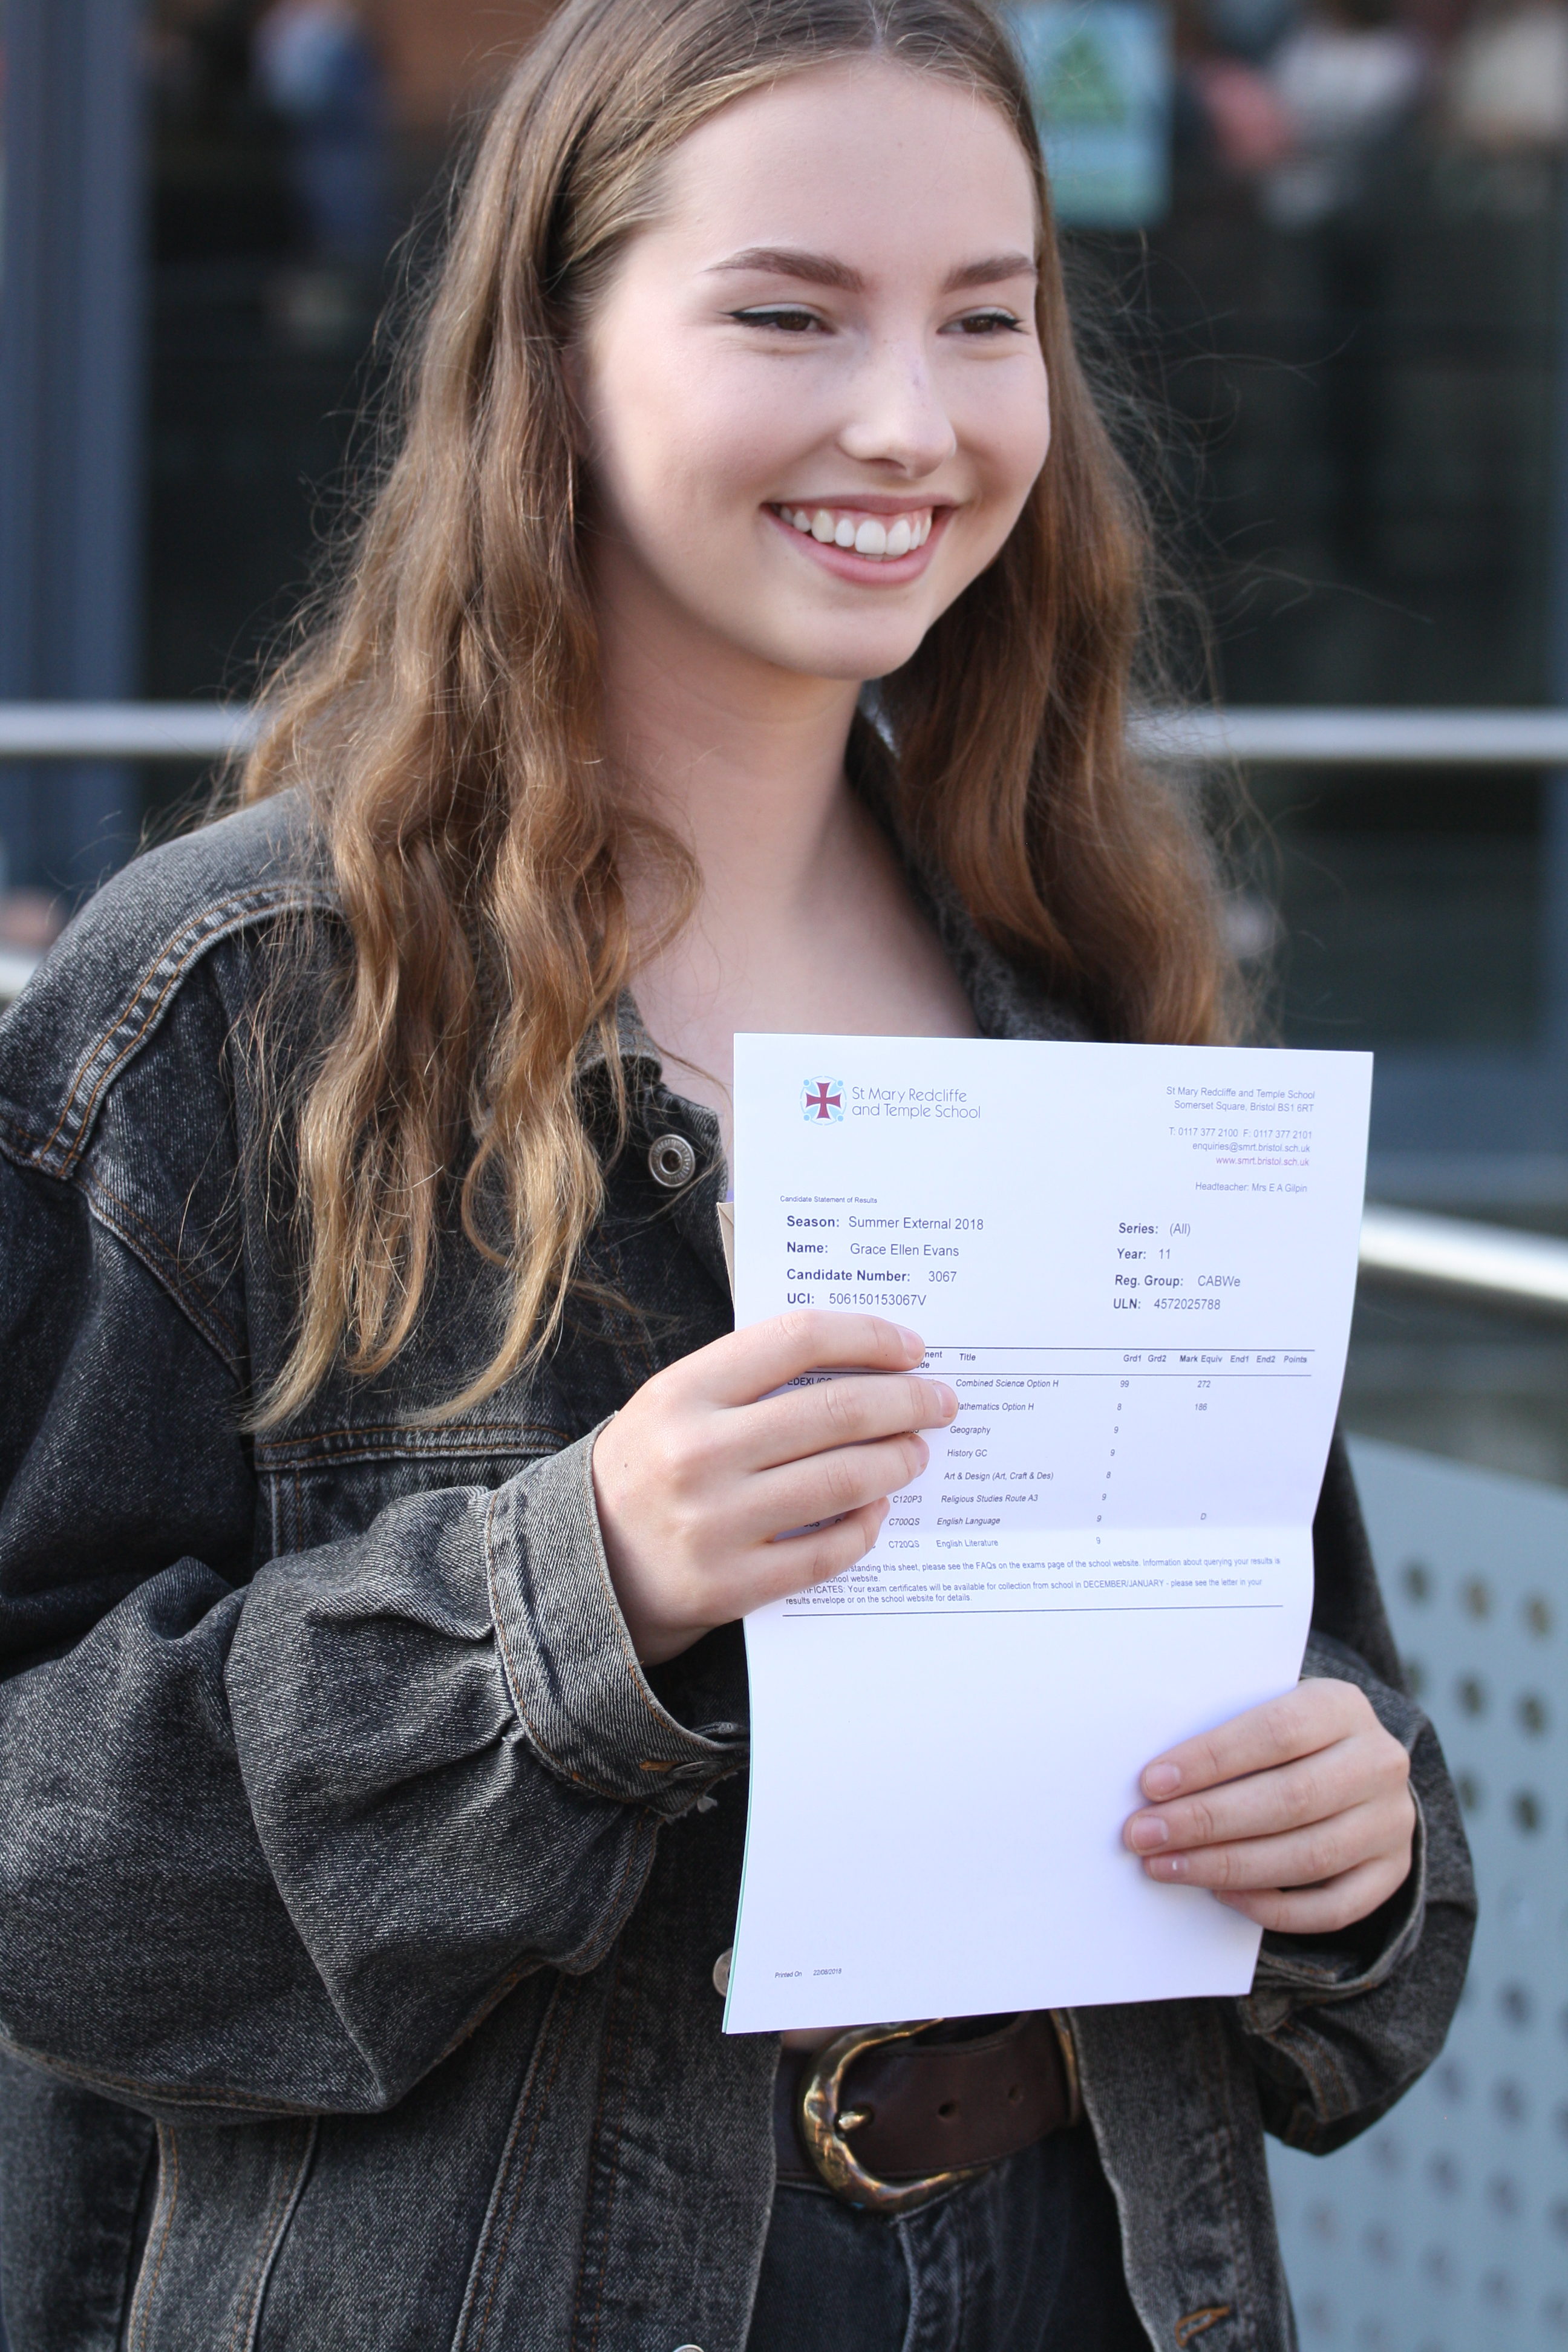 Grace Evans got seven grade 9s and two grade 8s in her GCSEs at St Mary Redcliffe and Temple School in Bristol (Rod Minchin/PA)